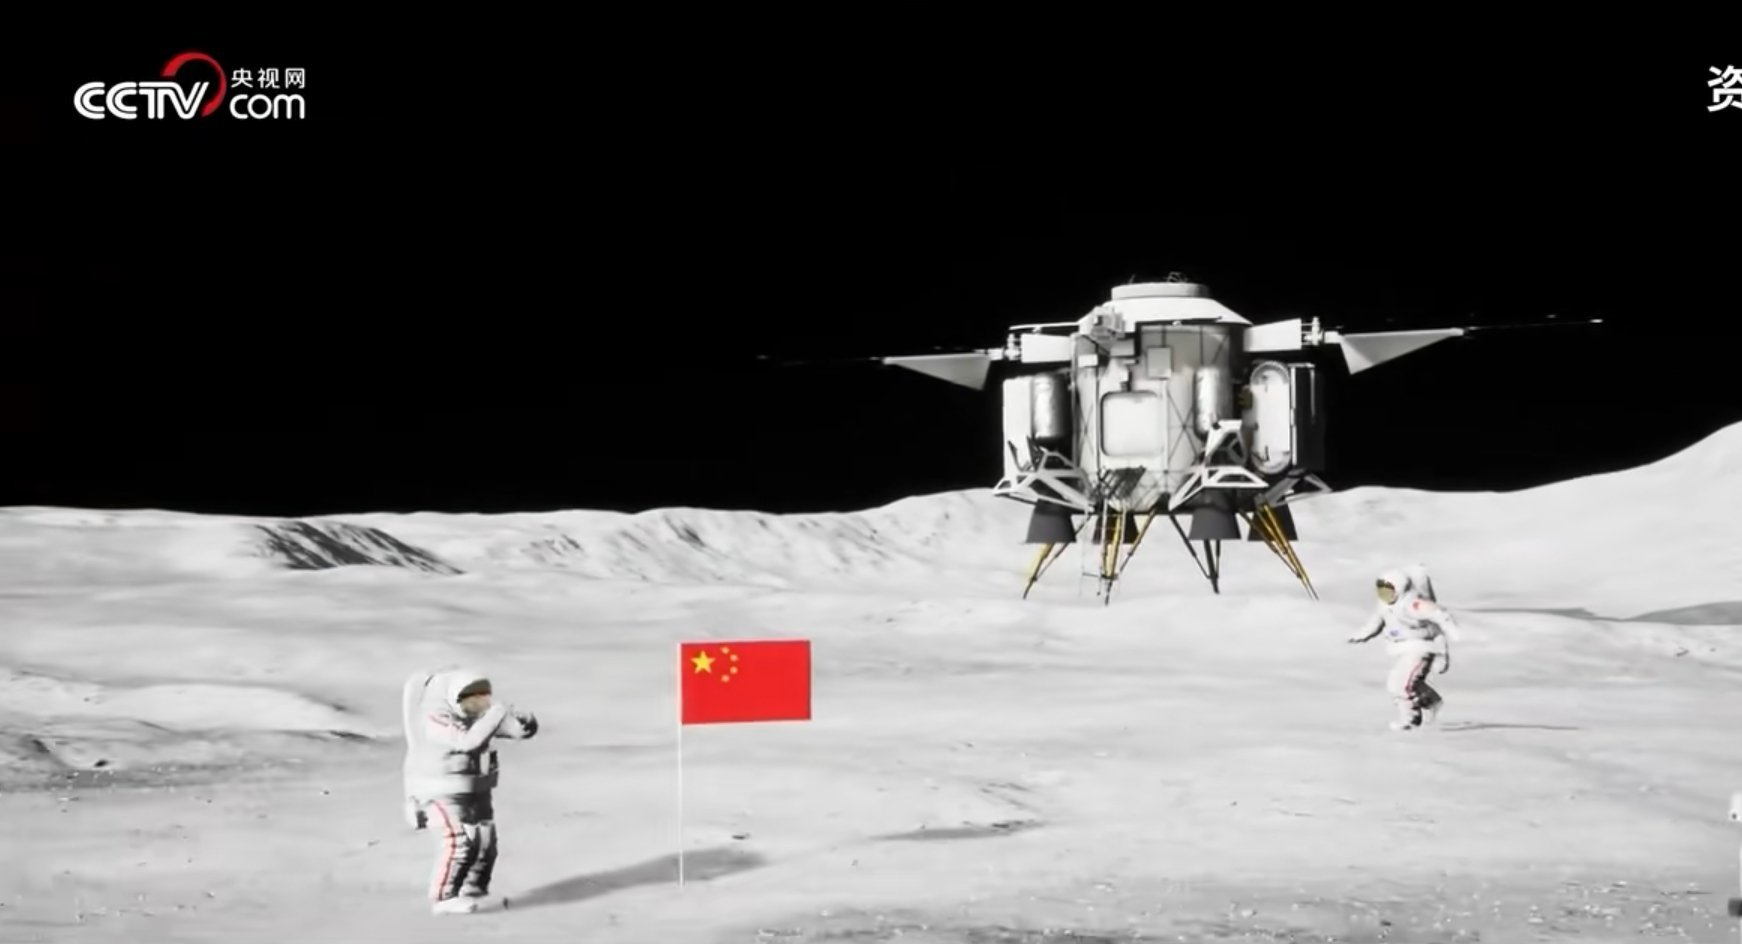 Here's China's 1st moon landing with astronauts might look like (video)